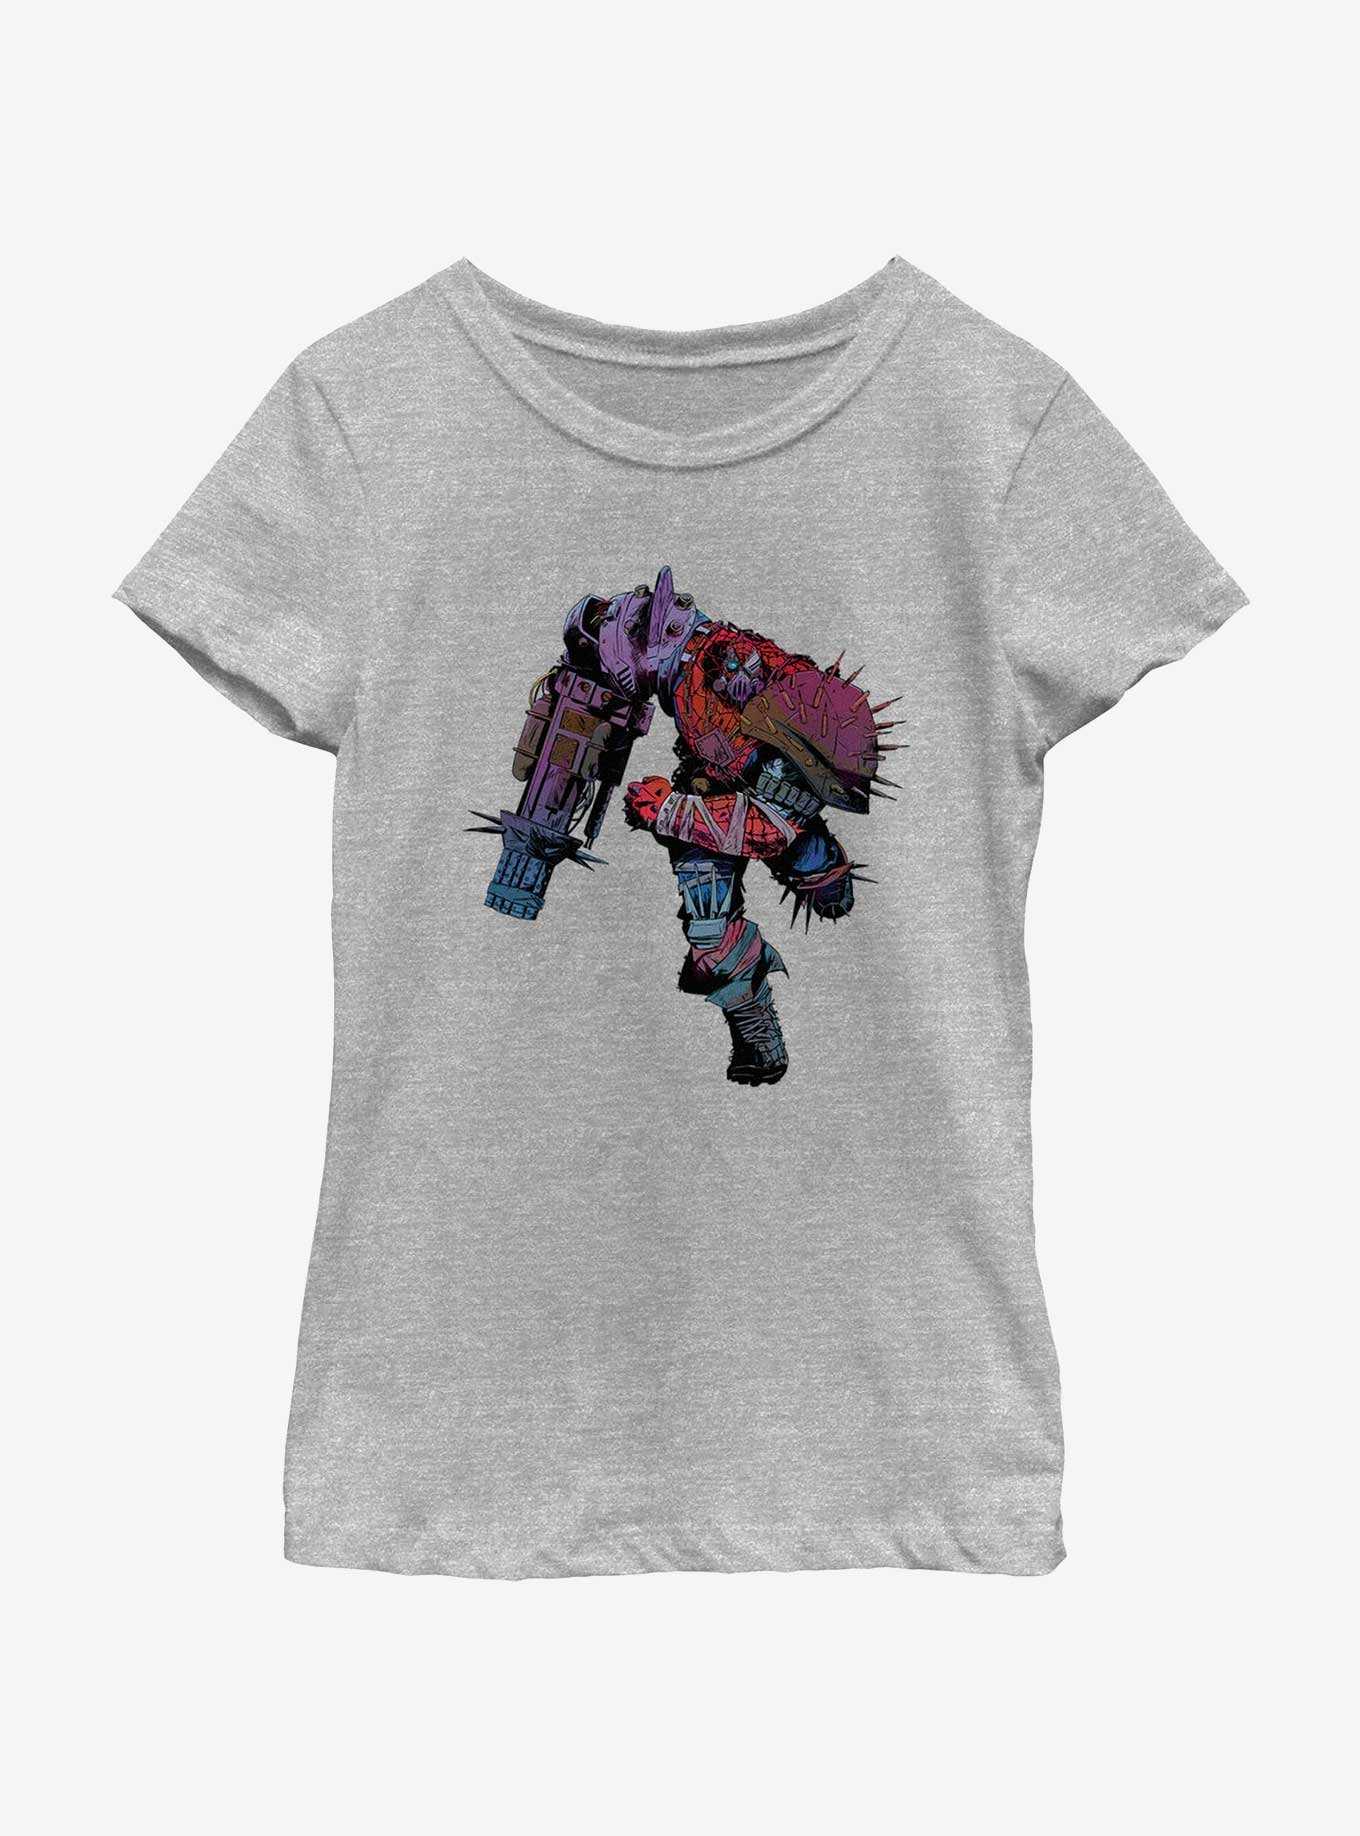 Marvel Spider-Man: Across The Spiderverse Cyborg Spider-Woman Pose Youth Girls T-Shirt, , hi-res